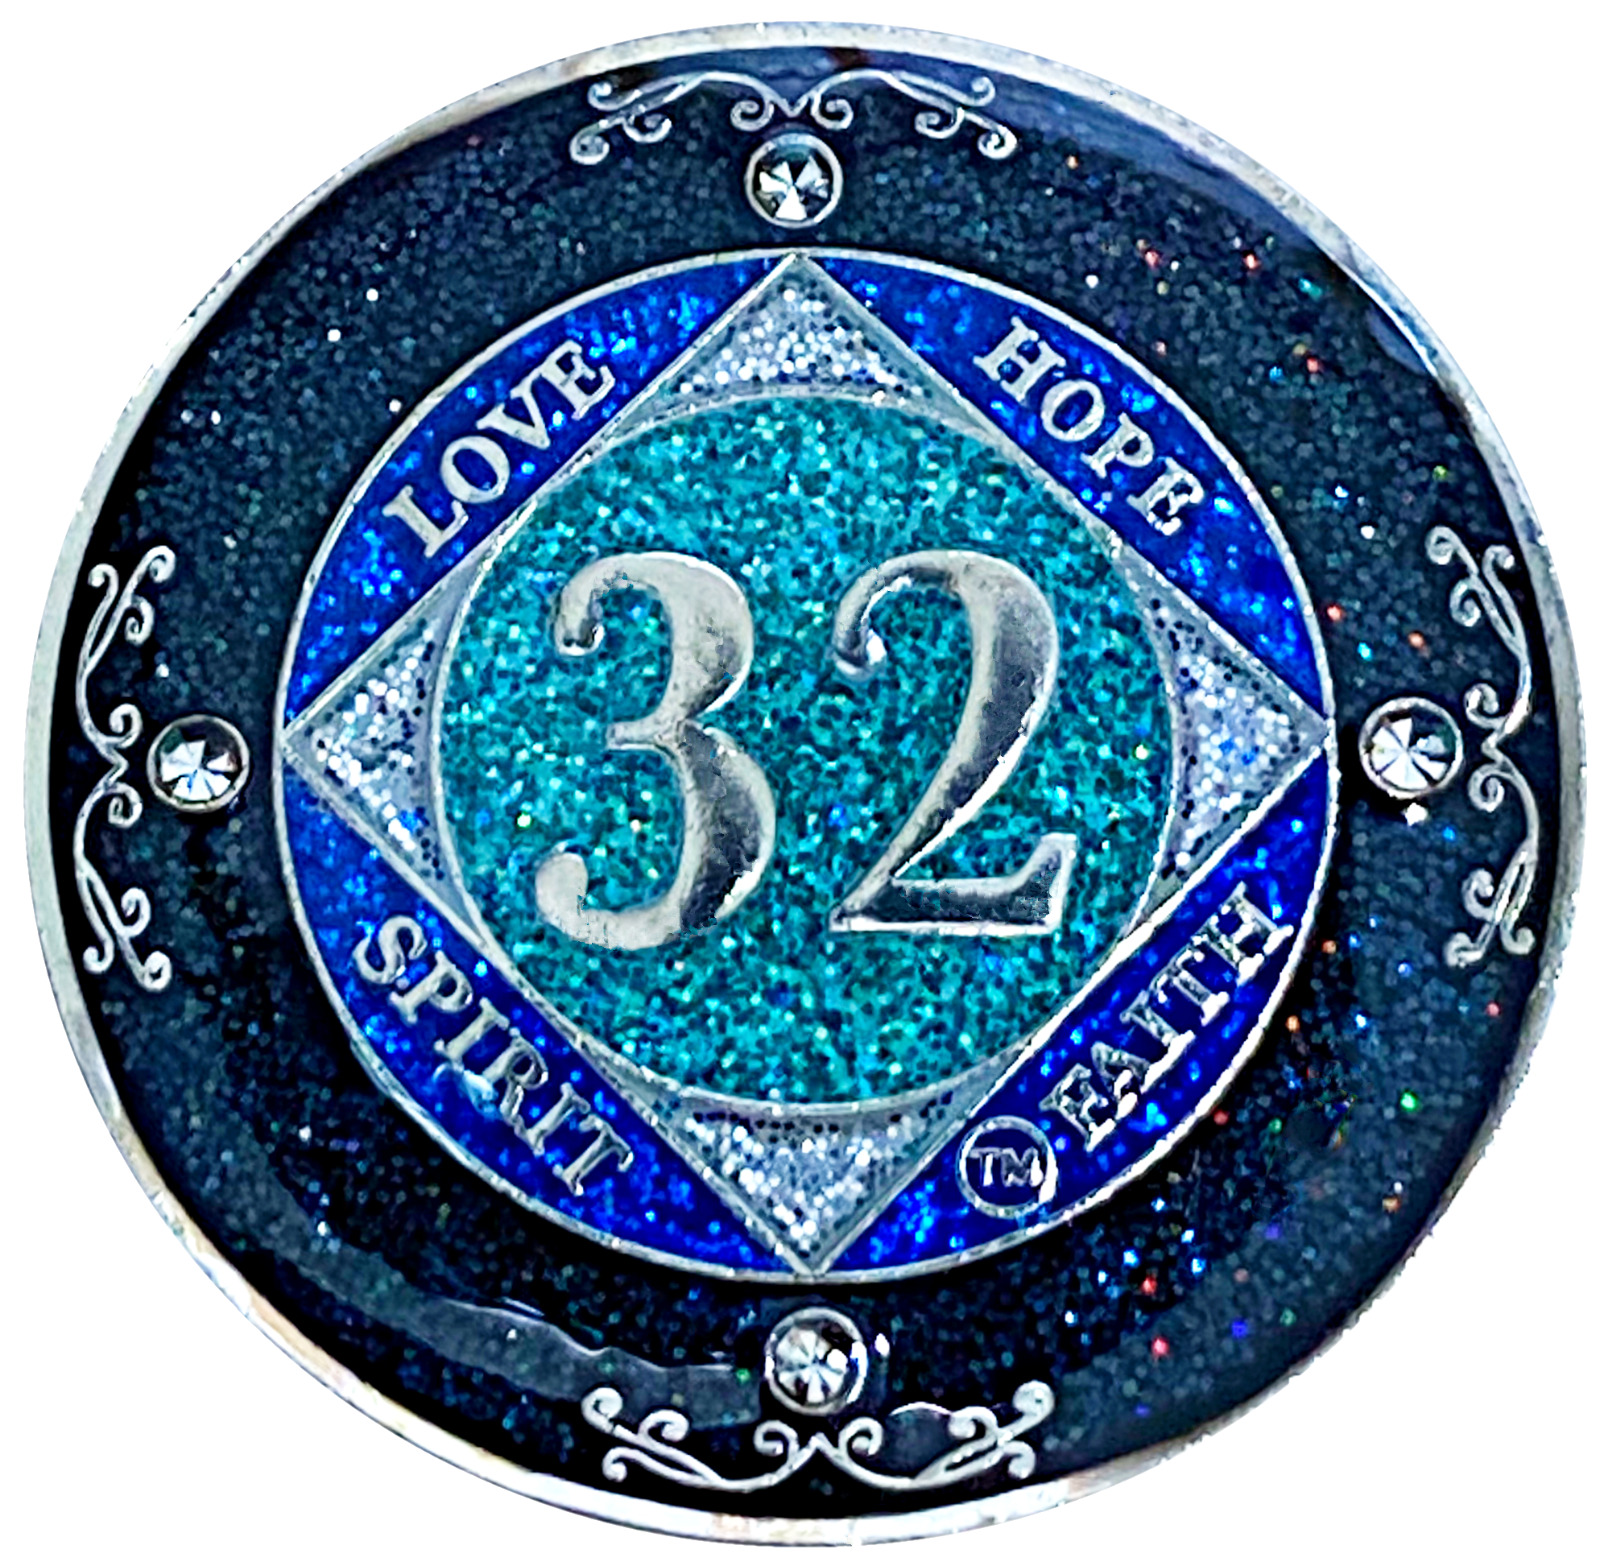 Na 32 Year Glitter & Crystals Medallion, Narcotics Anonymous Blue Glitter Coin